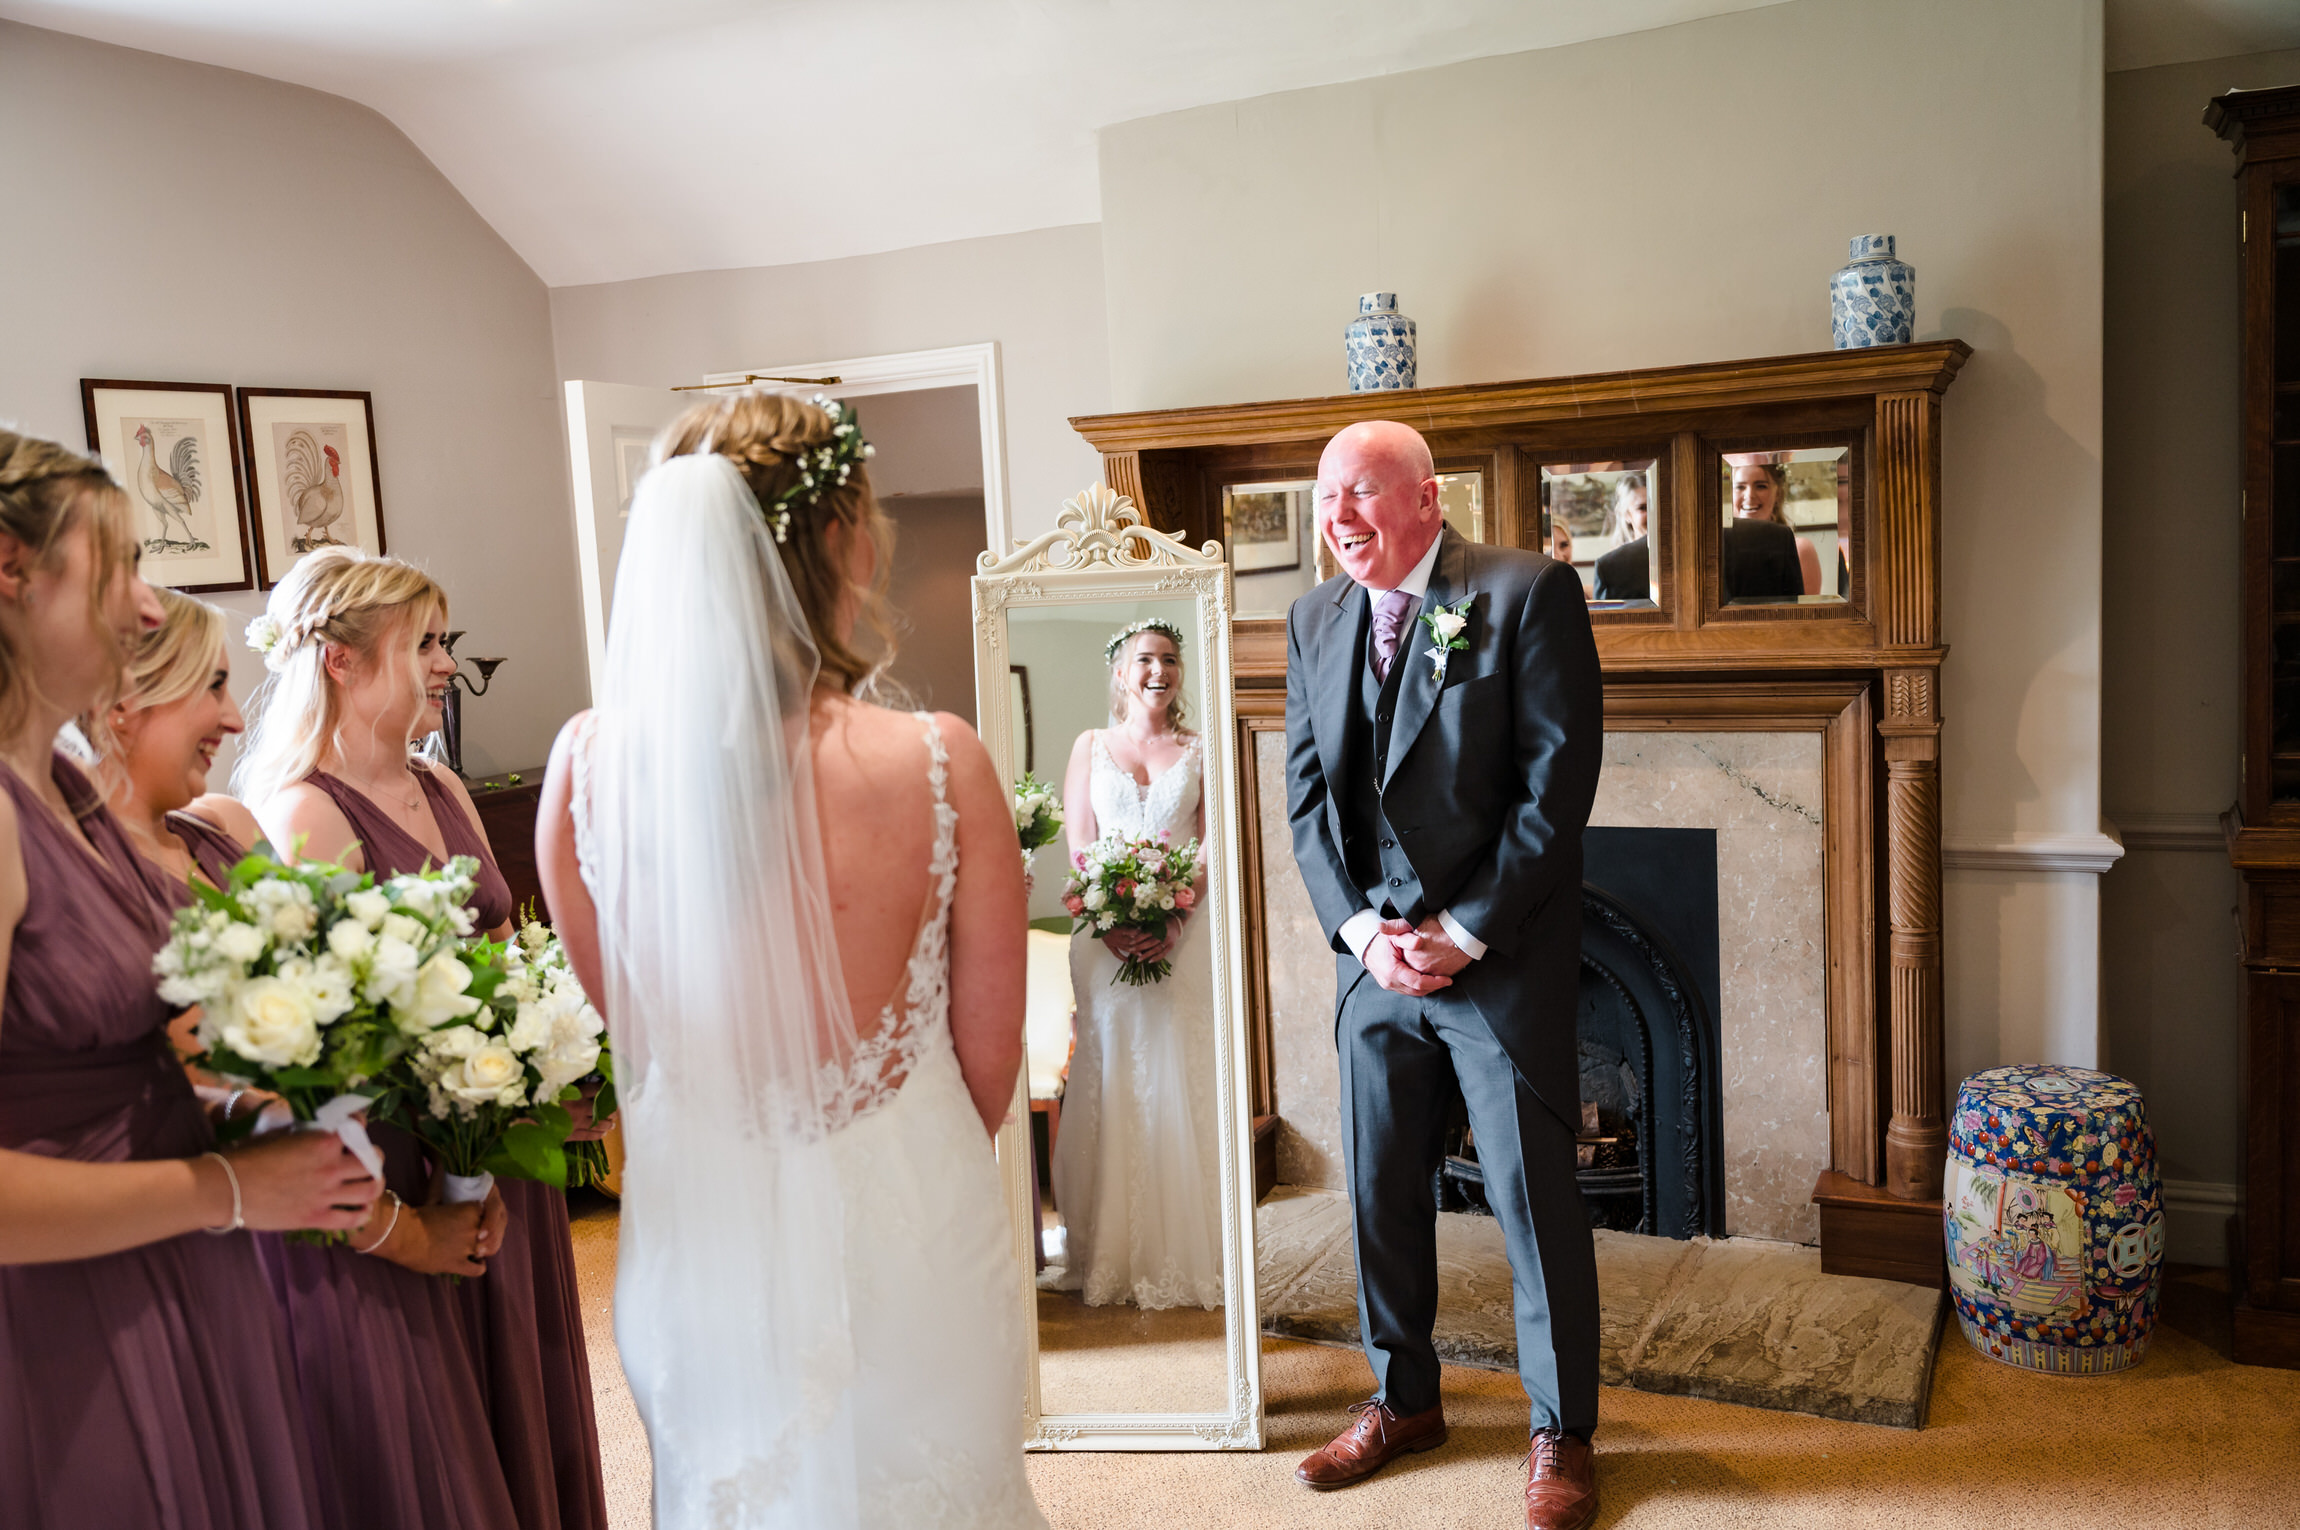 Dads first look with bride